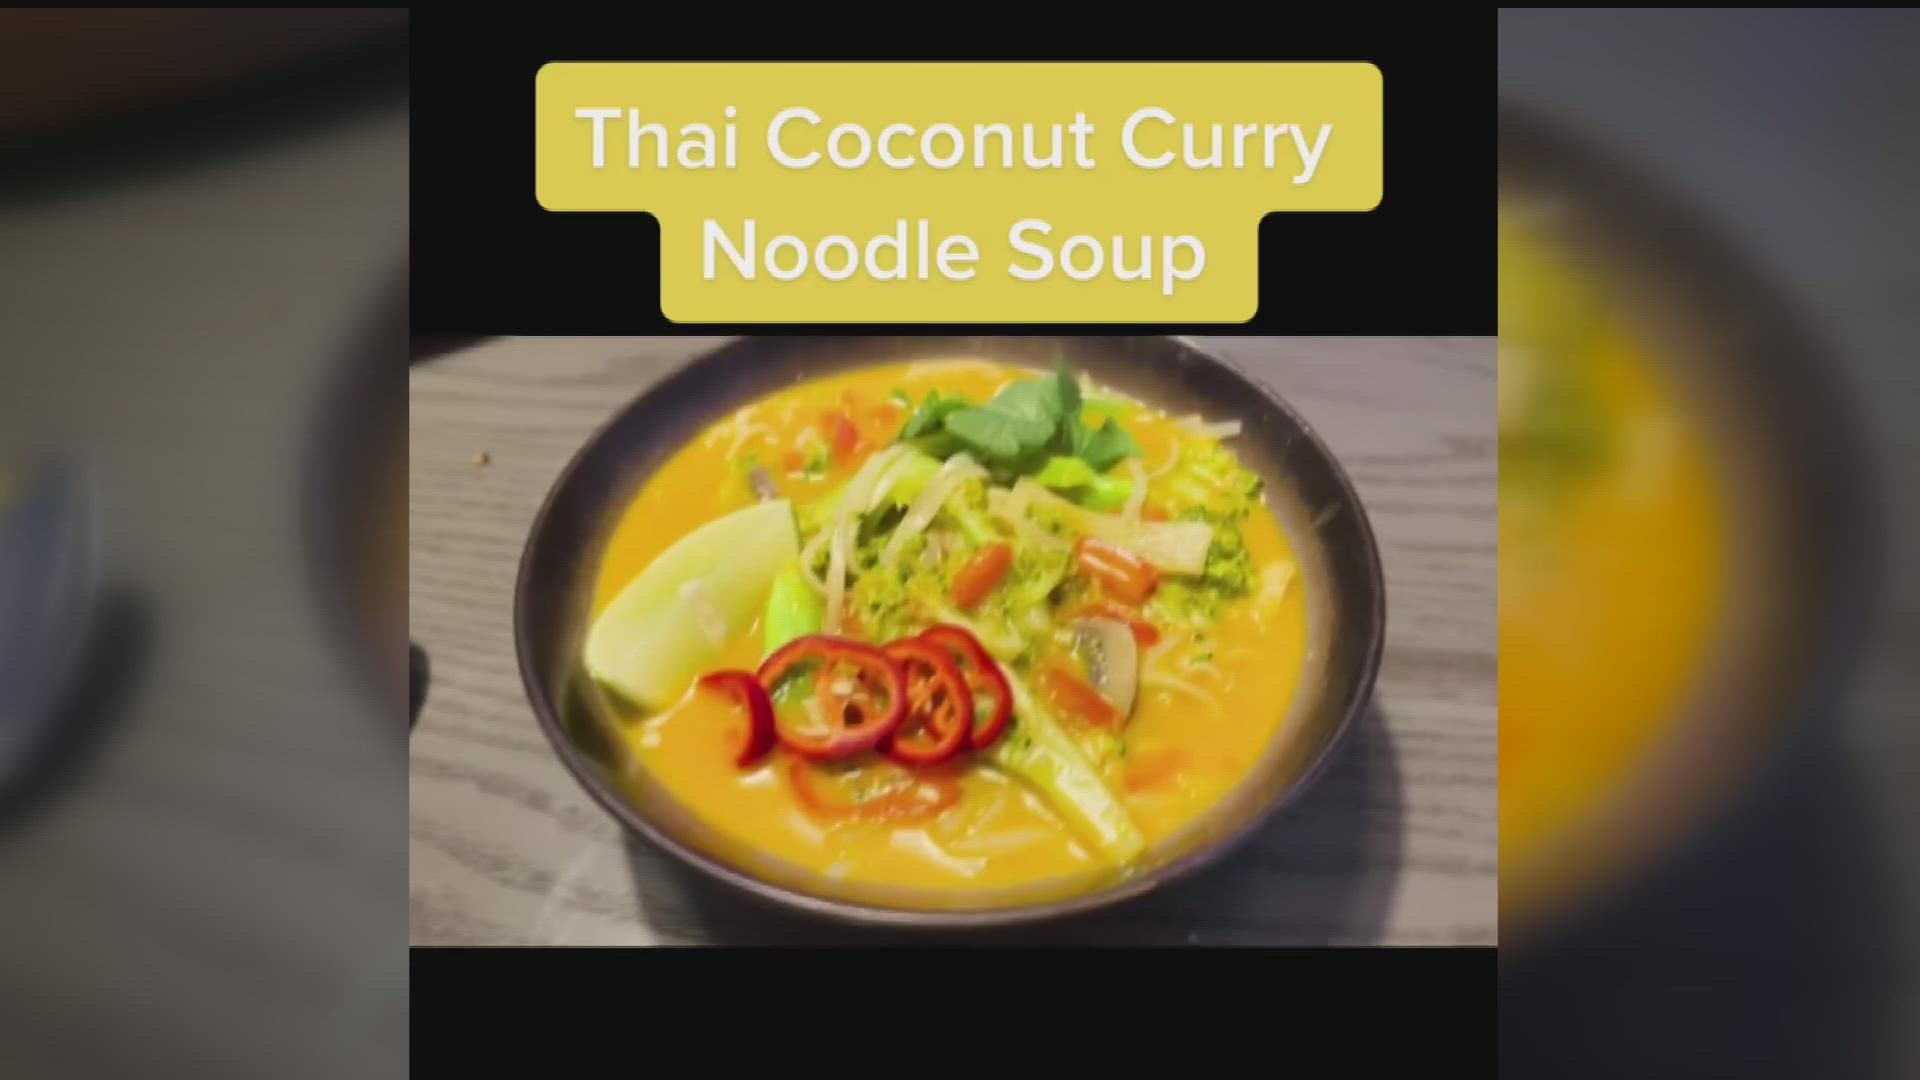 KARE 11's Alicia Lewis loves Thai cuisine and after trying a few recipes, this red curry coconut noodle soup does the job!